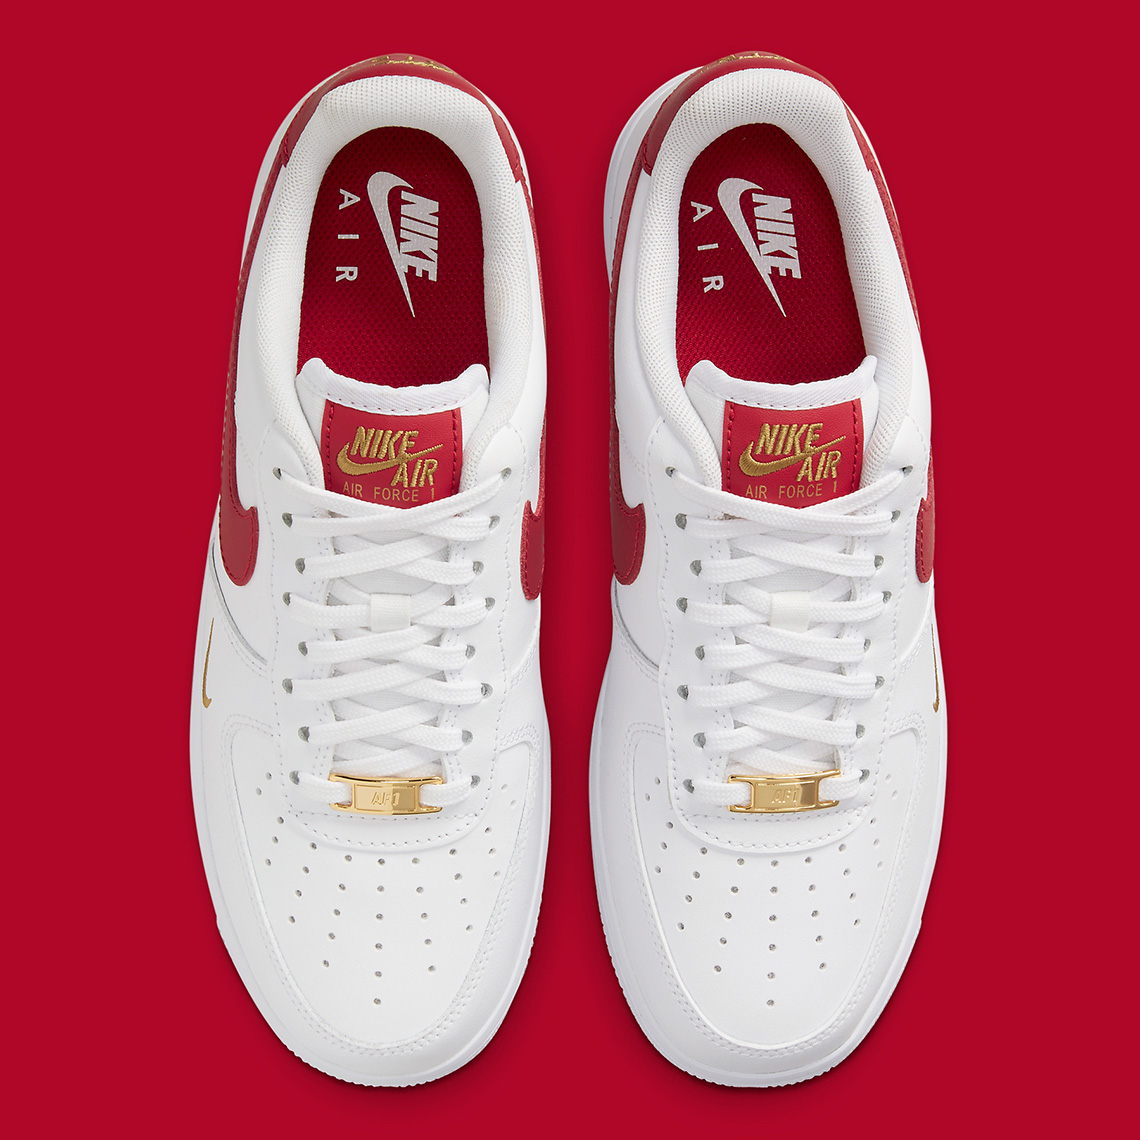 Nike Air nike air force red and white Force 1 Red Gold CZ0270-104 | SneakerNews.com